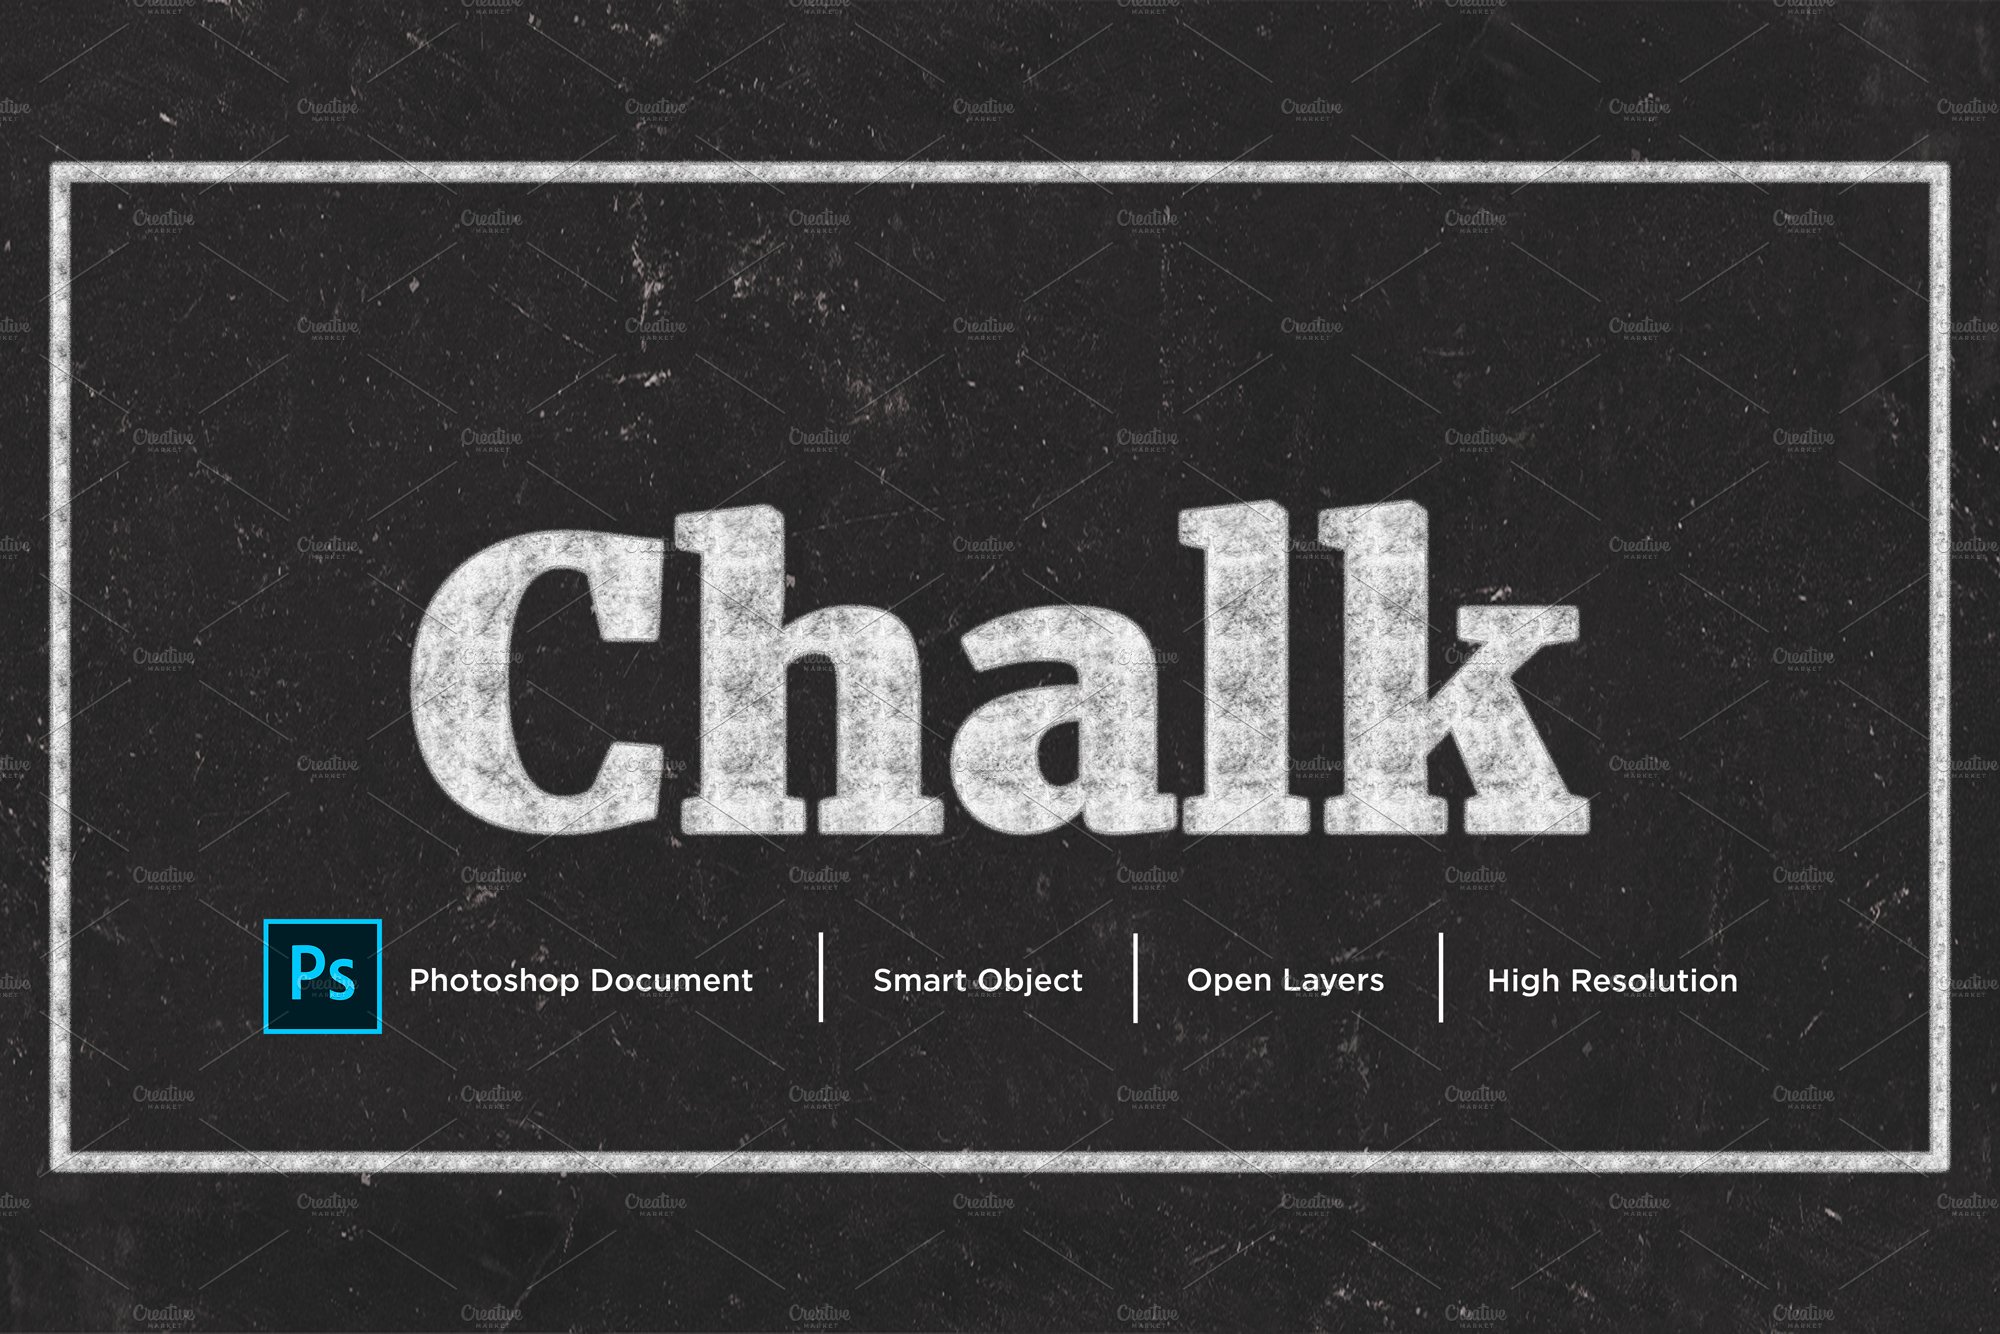 Chalk Text Effect & Layer Stylecover image.